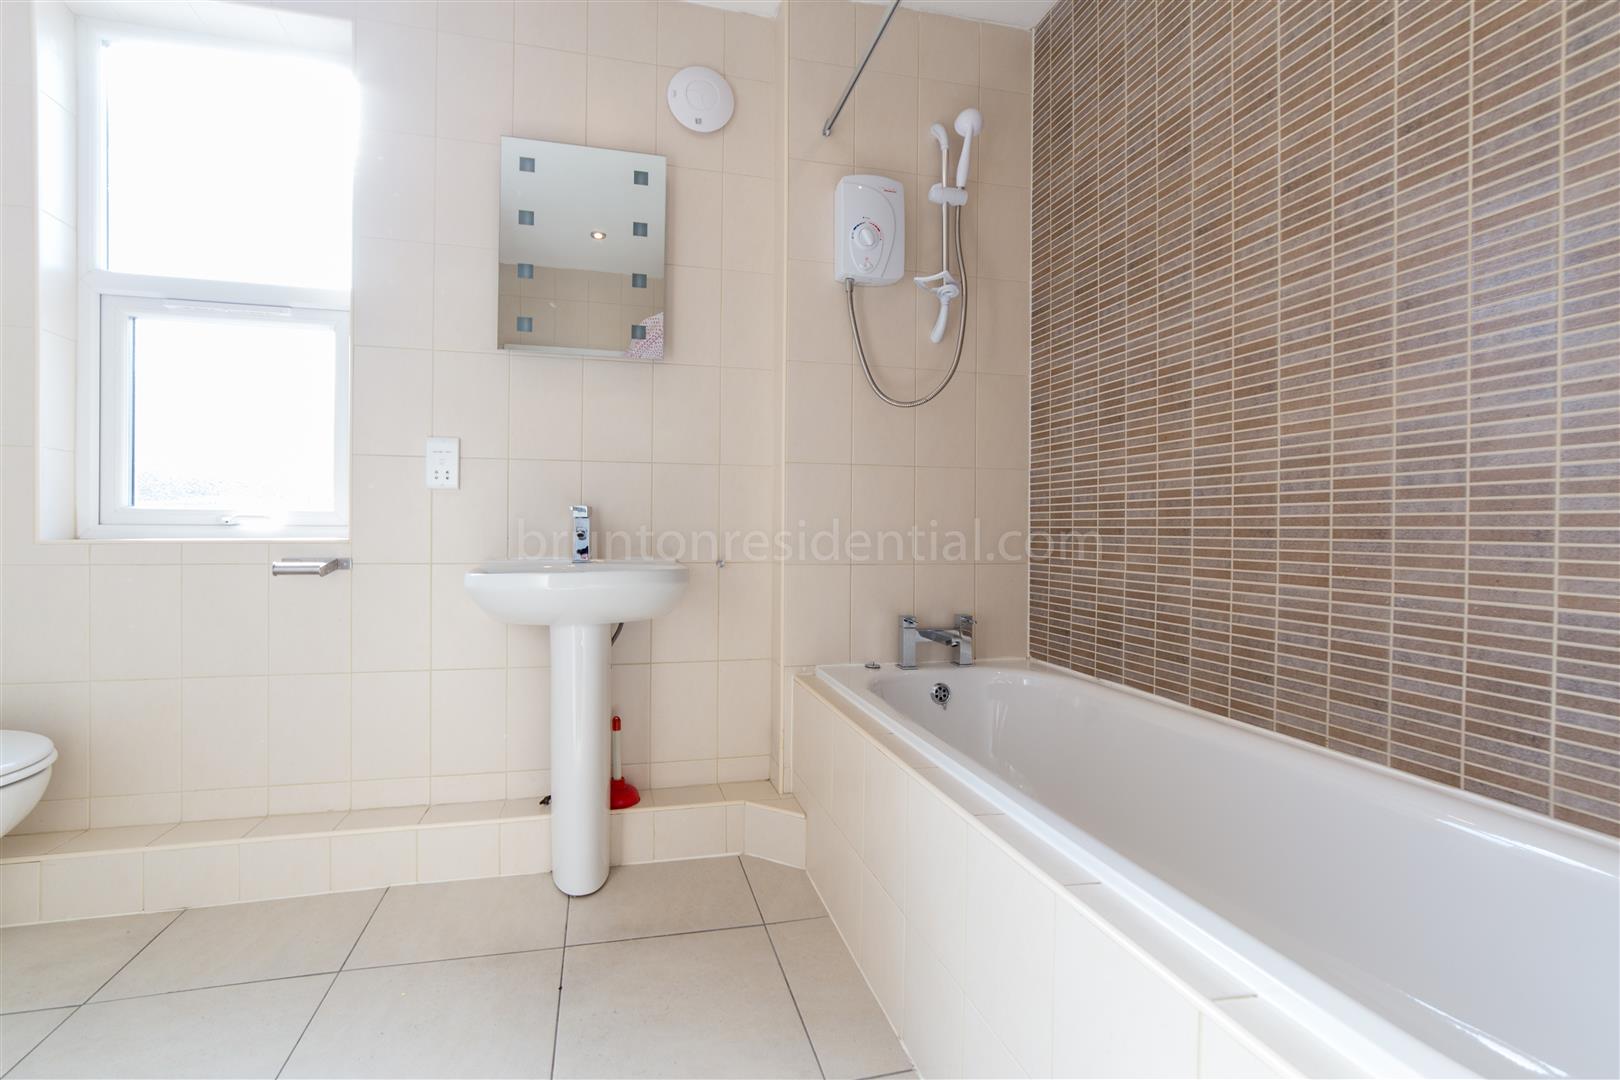 4 bed maisonette to rent in Chillingham Road, Newcastle Upon Tyne  - Property Image 8